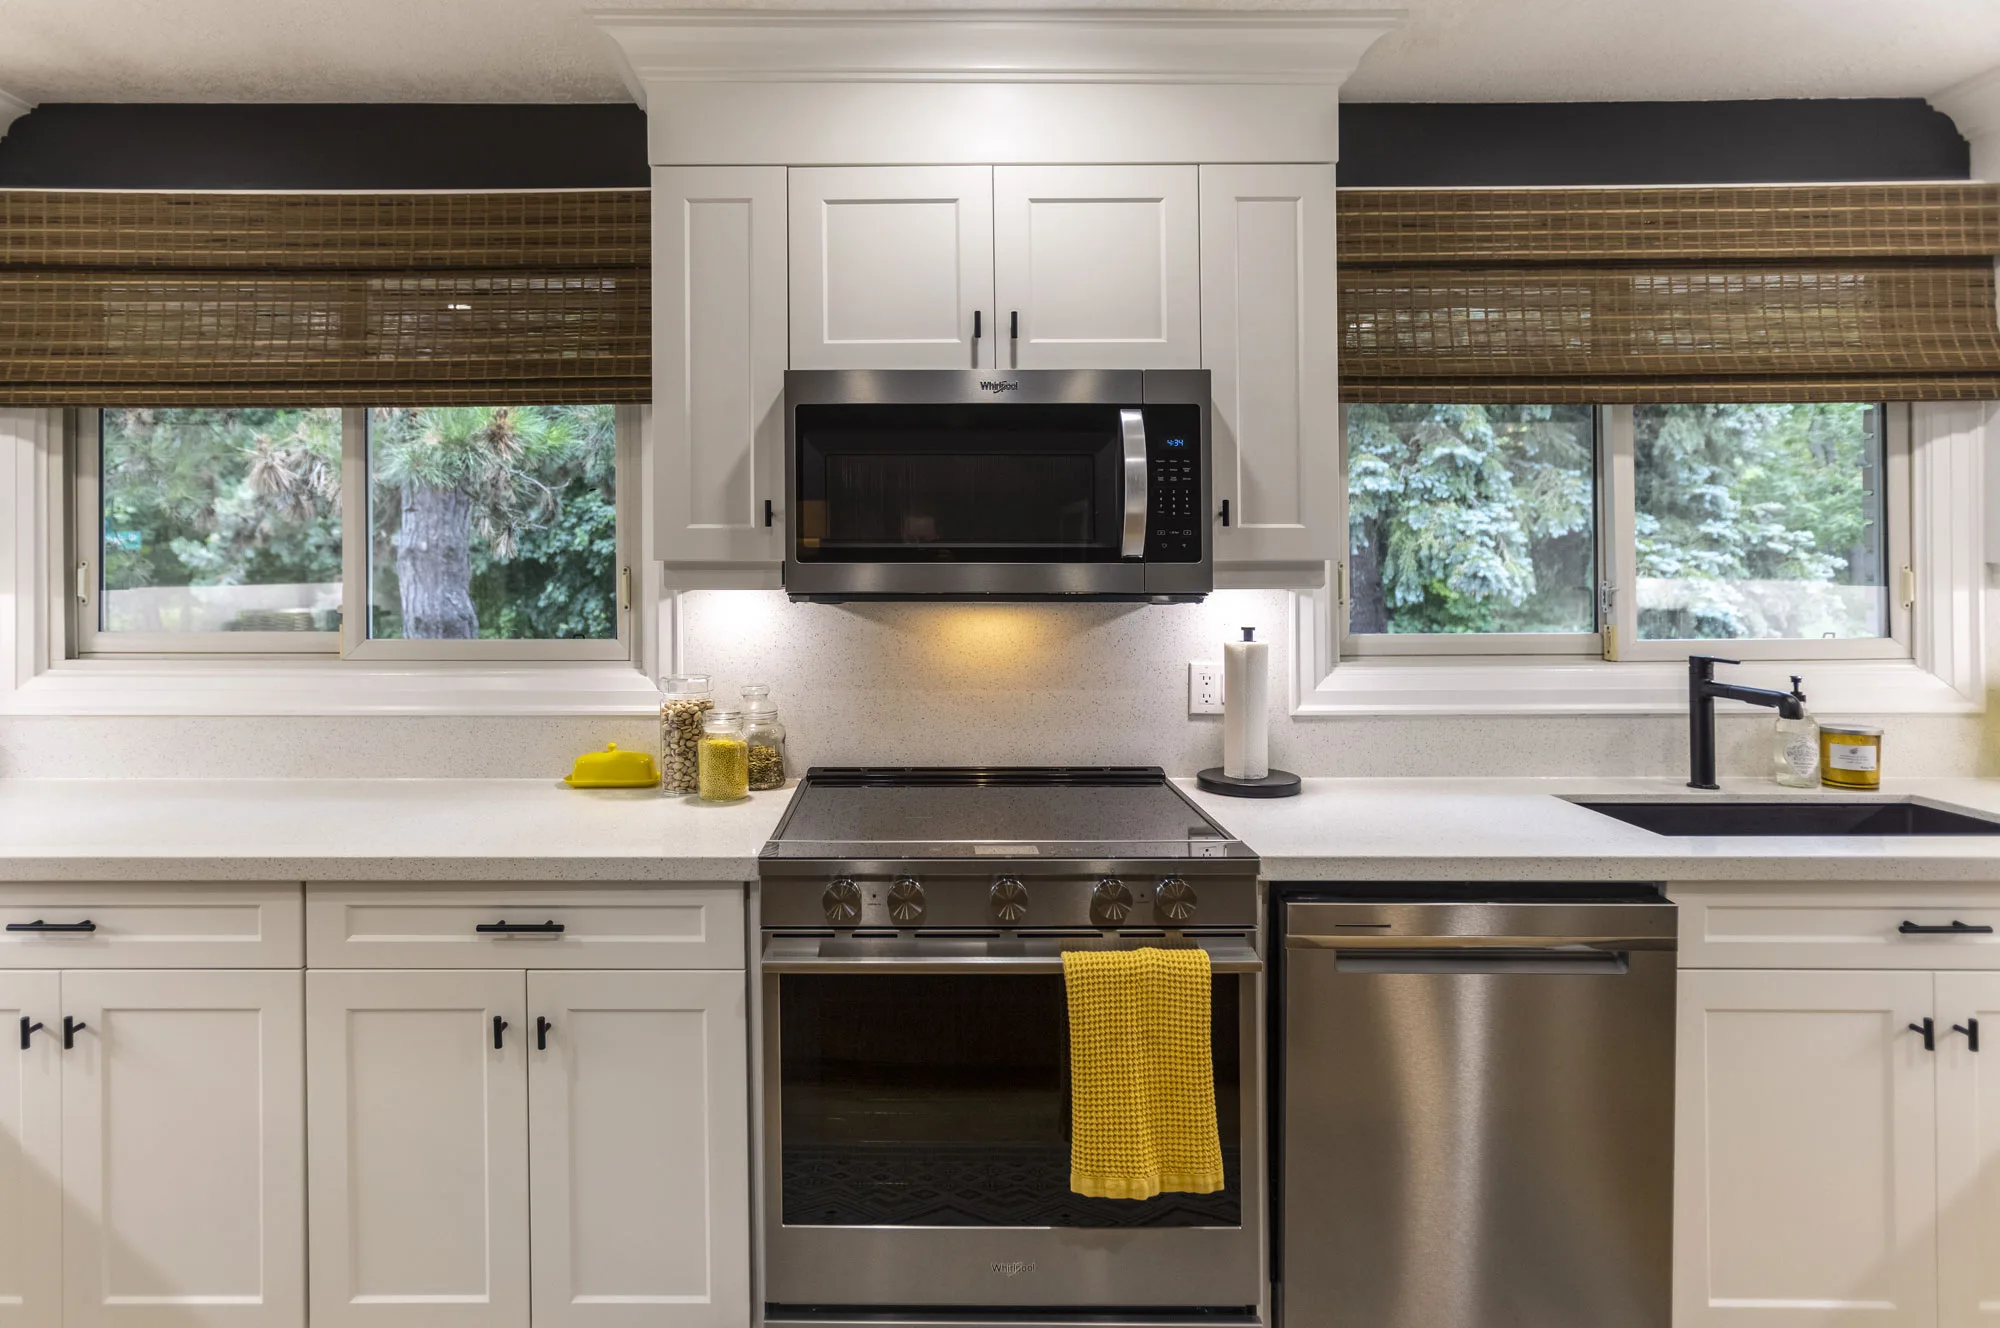 A modern kitchen cabinetry with black handles and stainless steel stove, dishwasher and microwave. A black sink with a black faucet